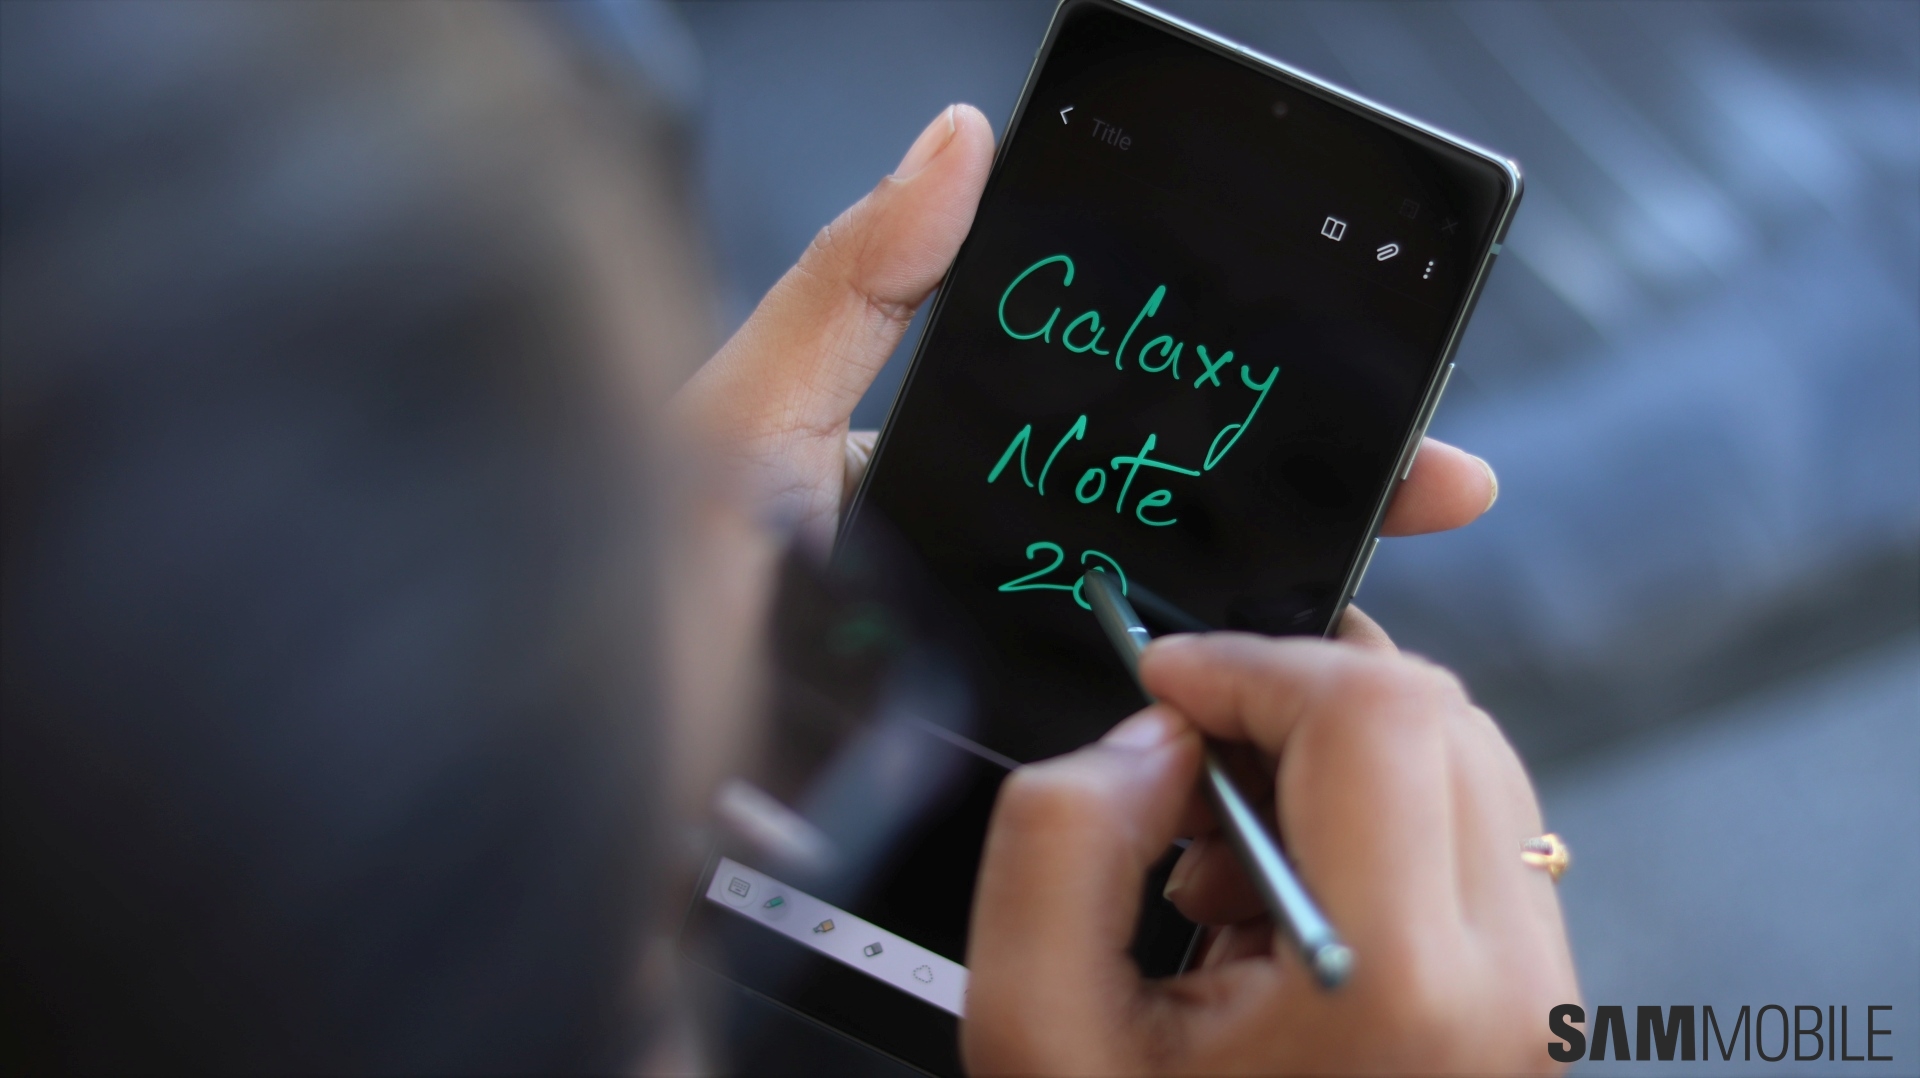 Samsung Galaxy Note 20 Ultra 5G Review: Features, Battery, and